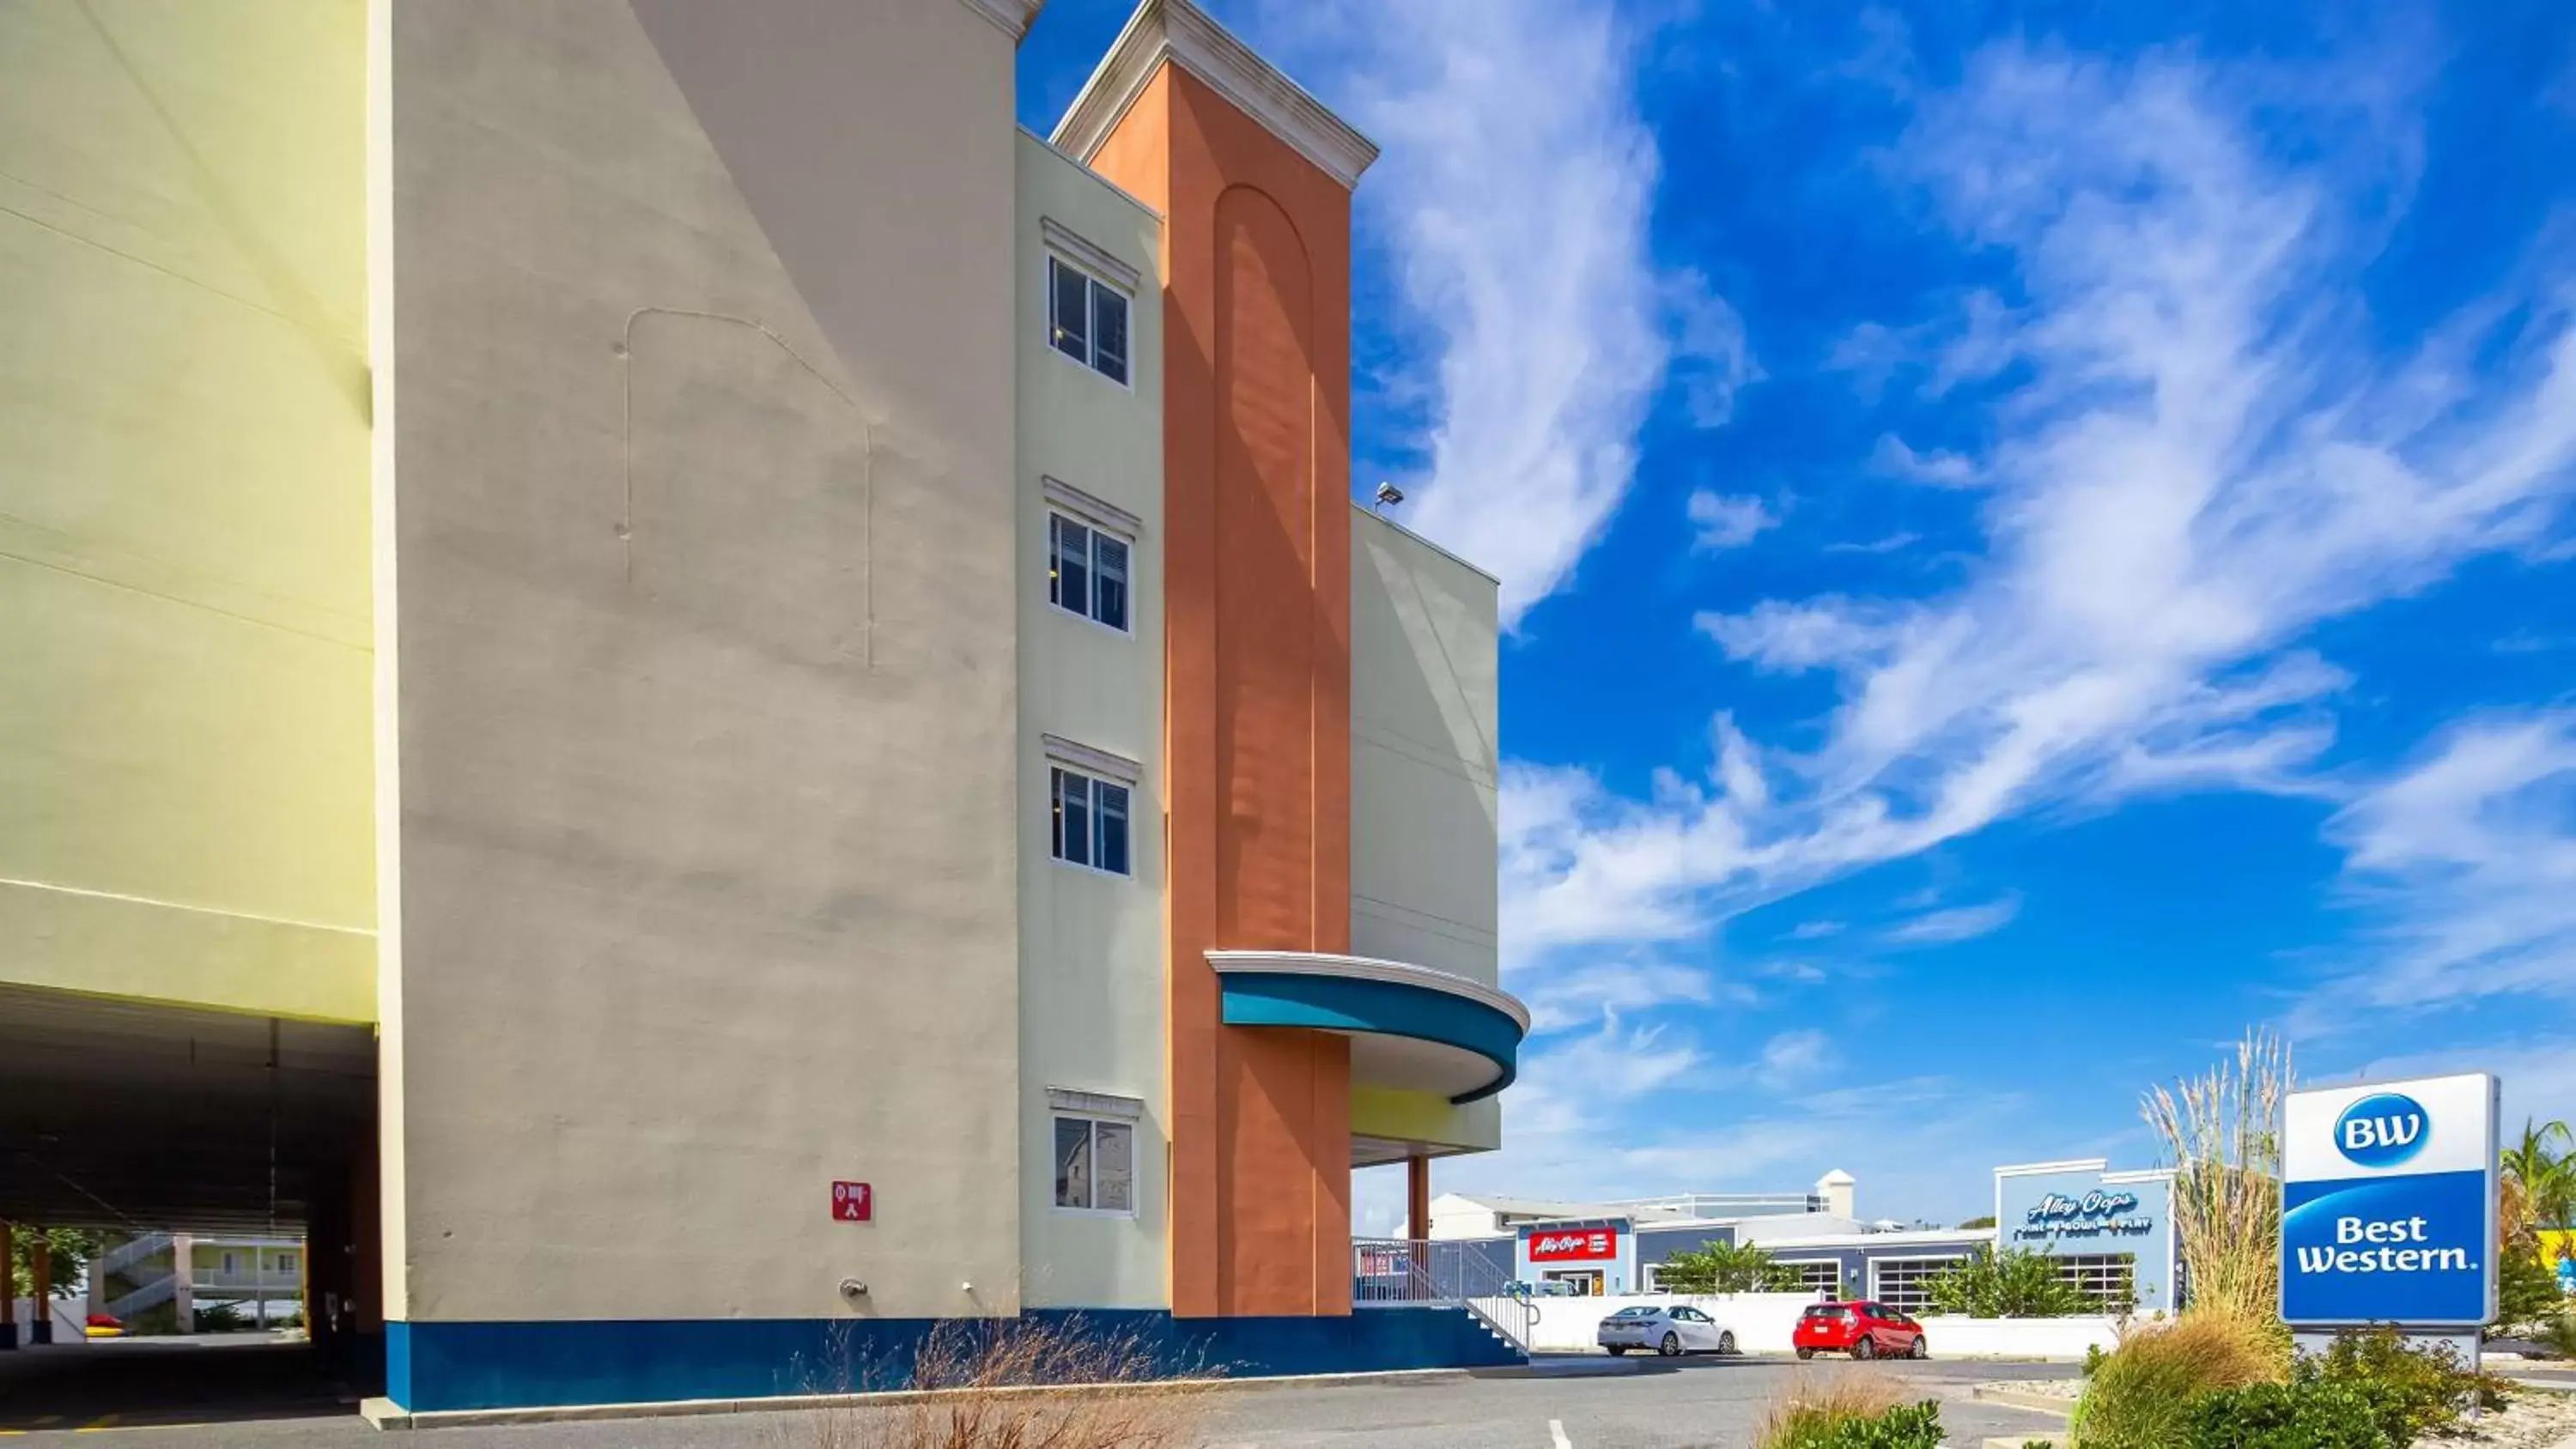 Property Building in Best Western Ocean City Hotel and Suites